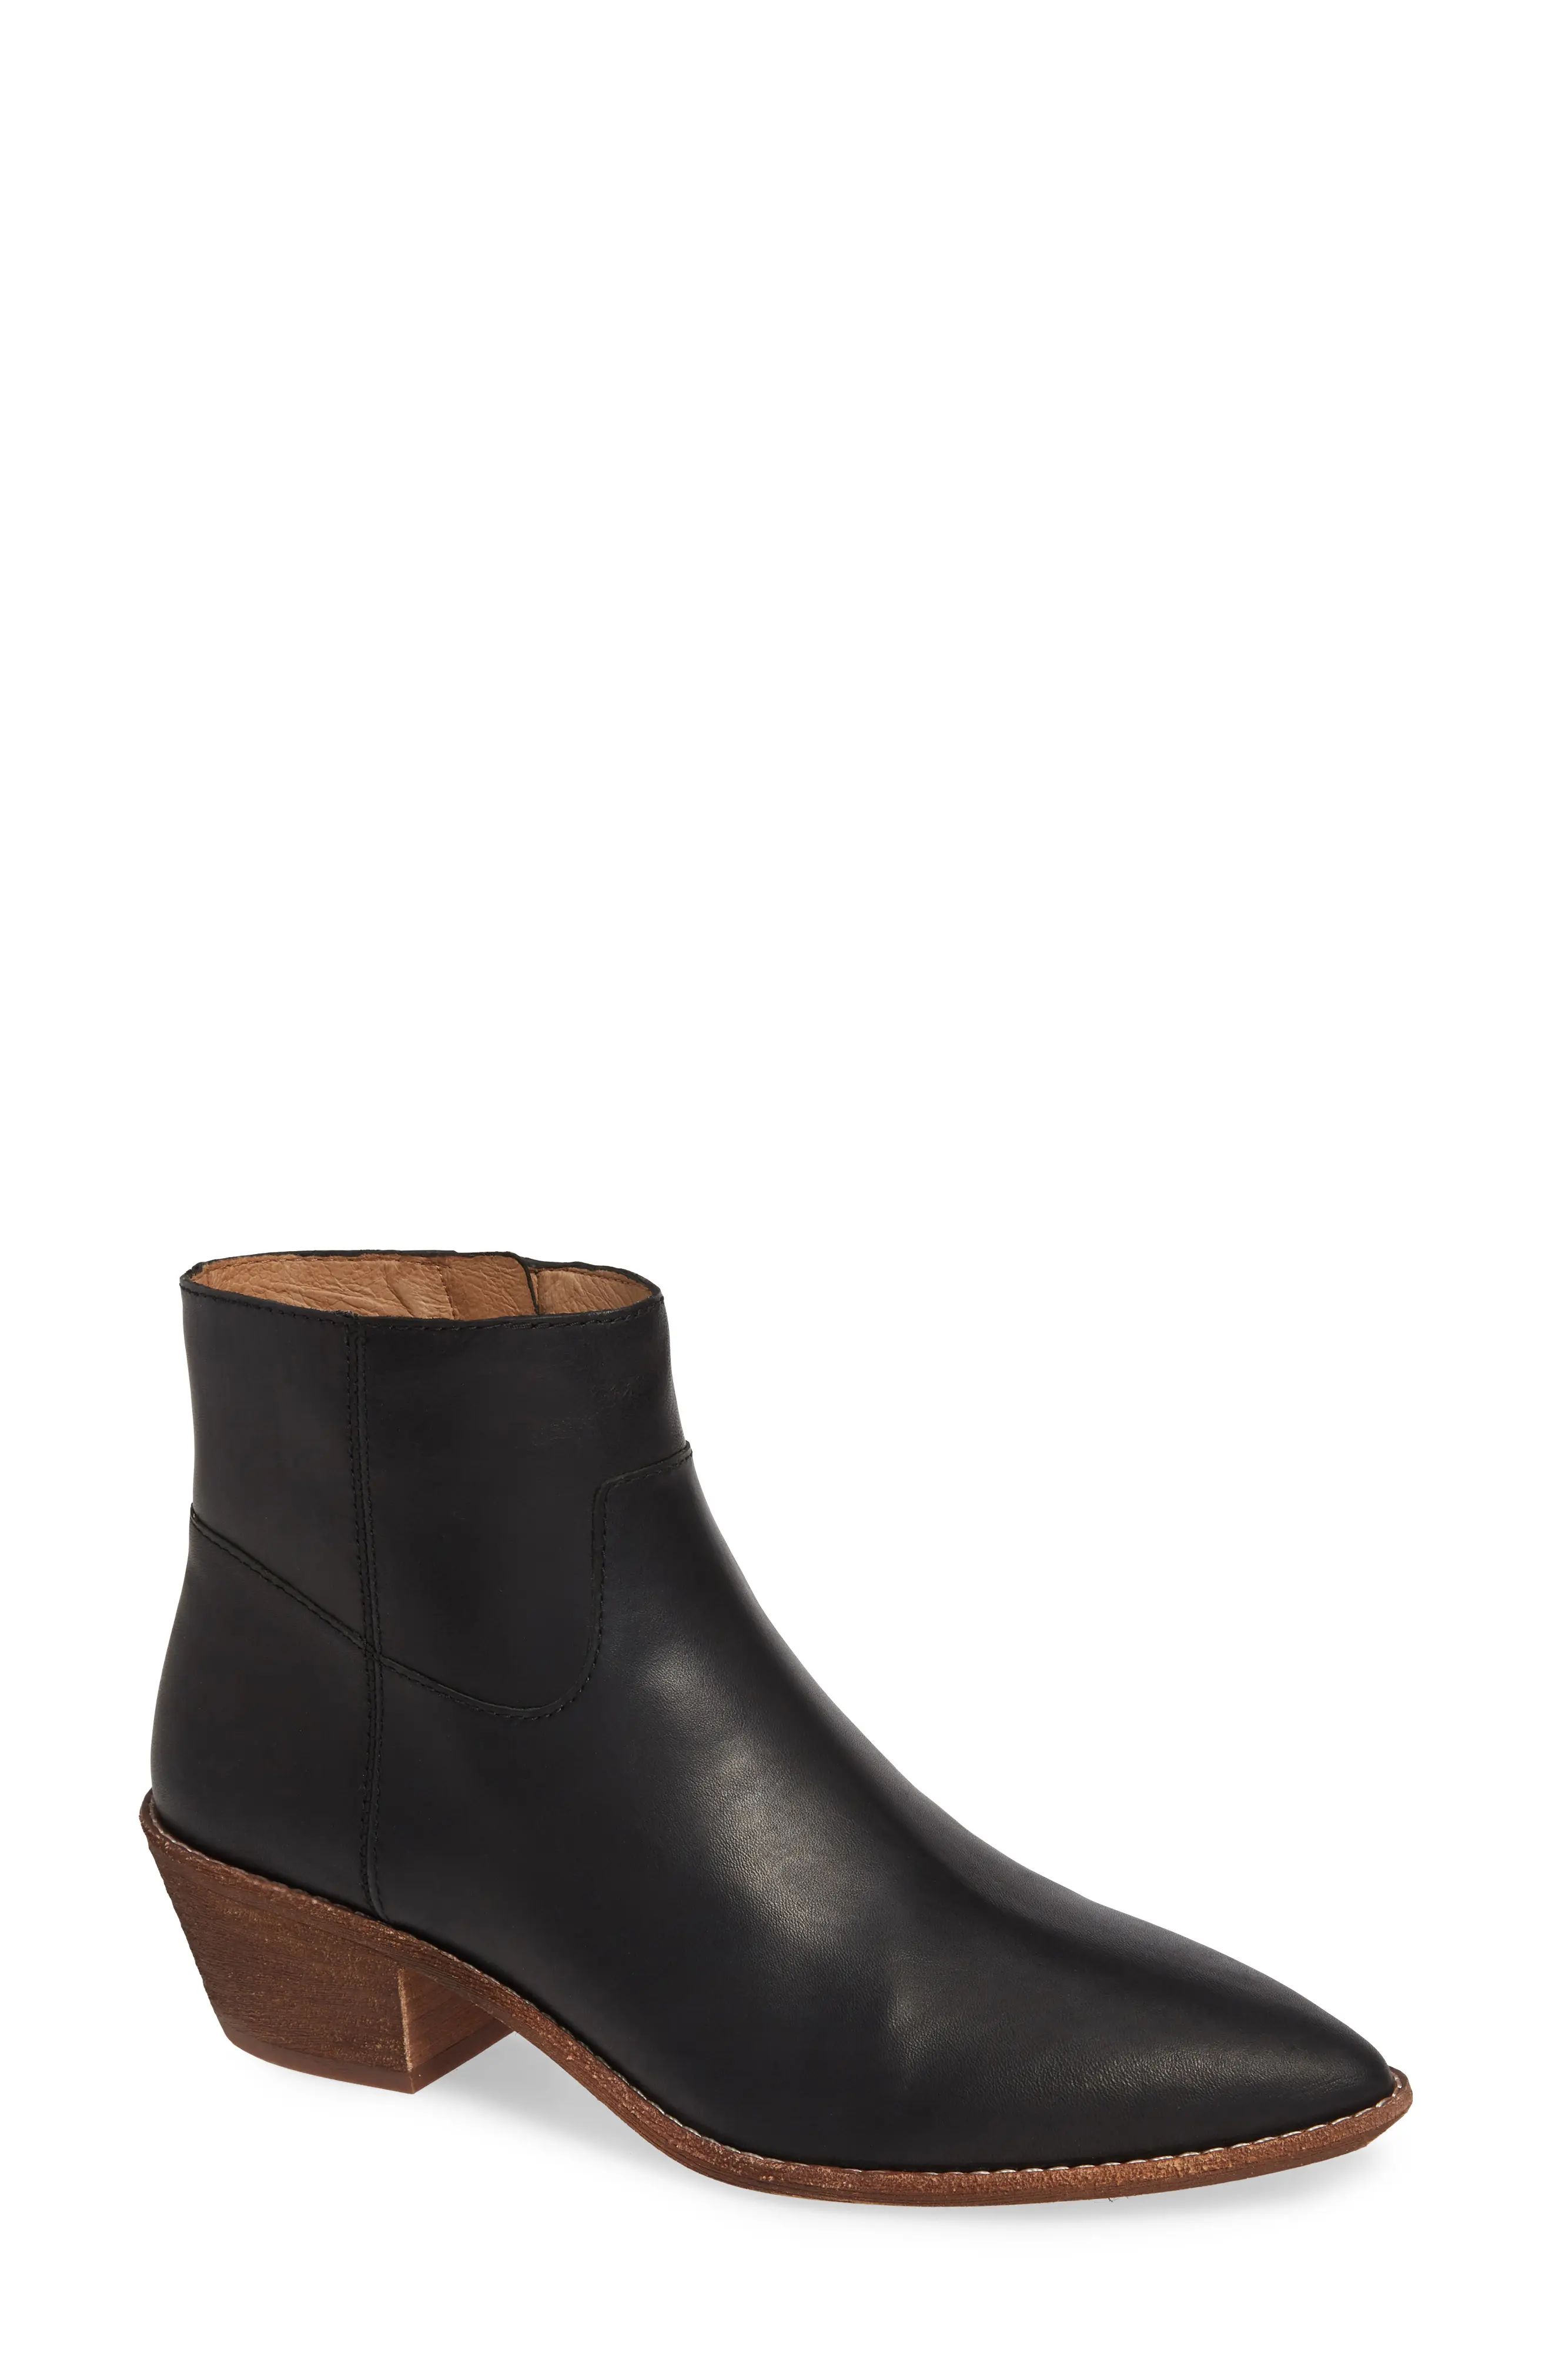 Women's Madewell The Charley Bootie, Size 9.5 M - Black | Nordstrom